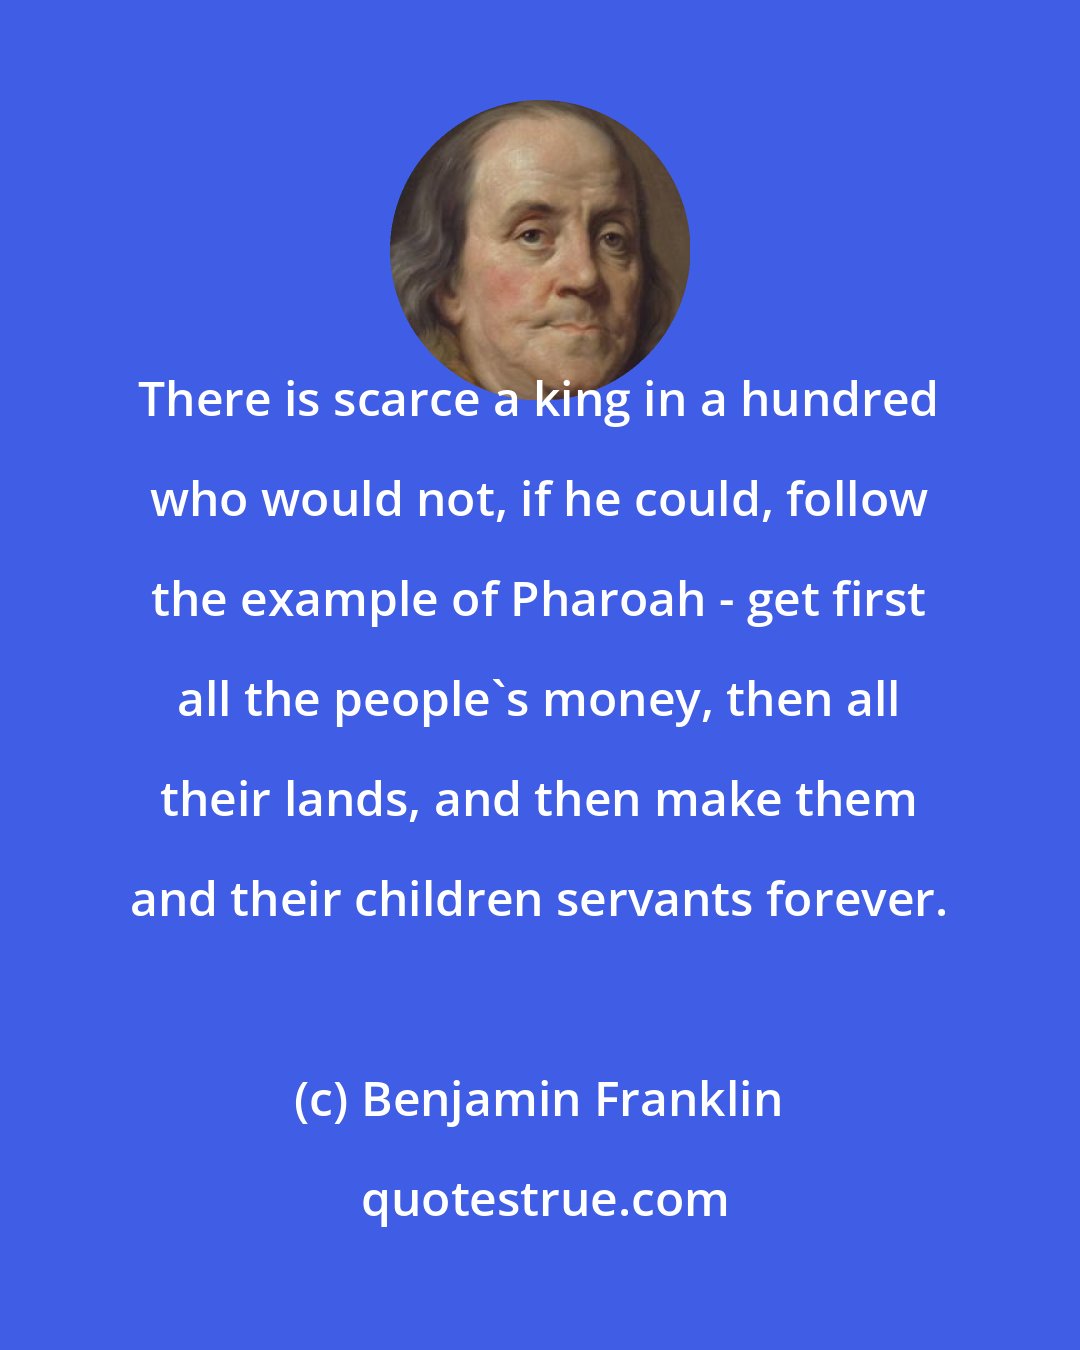 Benjamin Franklin: There is scarce a king in a hundred who would not, if he could, follow the example of Pharoah - get first all the people's money, then all their lands, and then make them and their children servants forever.